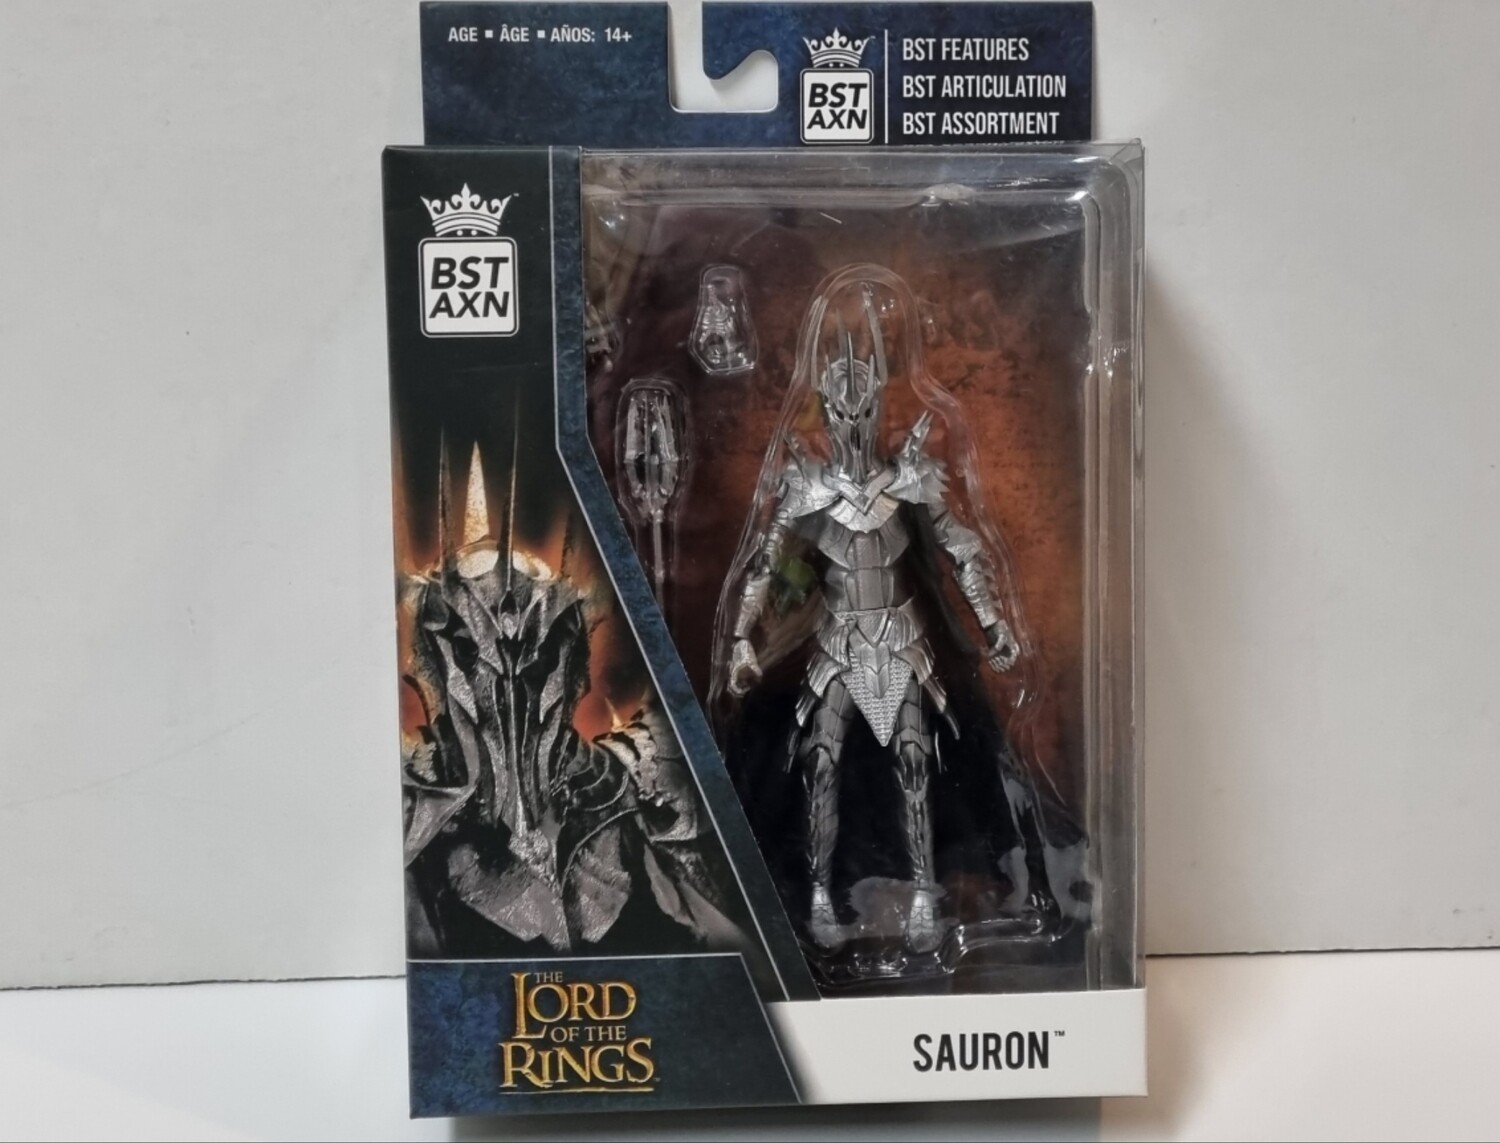 Actiefiguur, Sauron, The Lord of the Rings